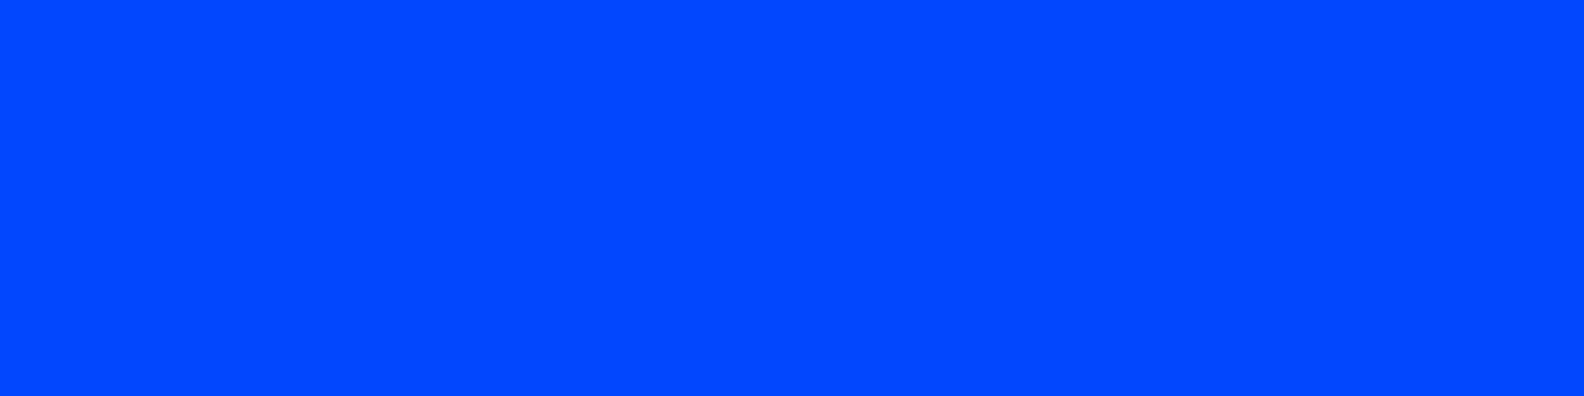 1584x396 Blue RYB Solid Color Background